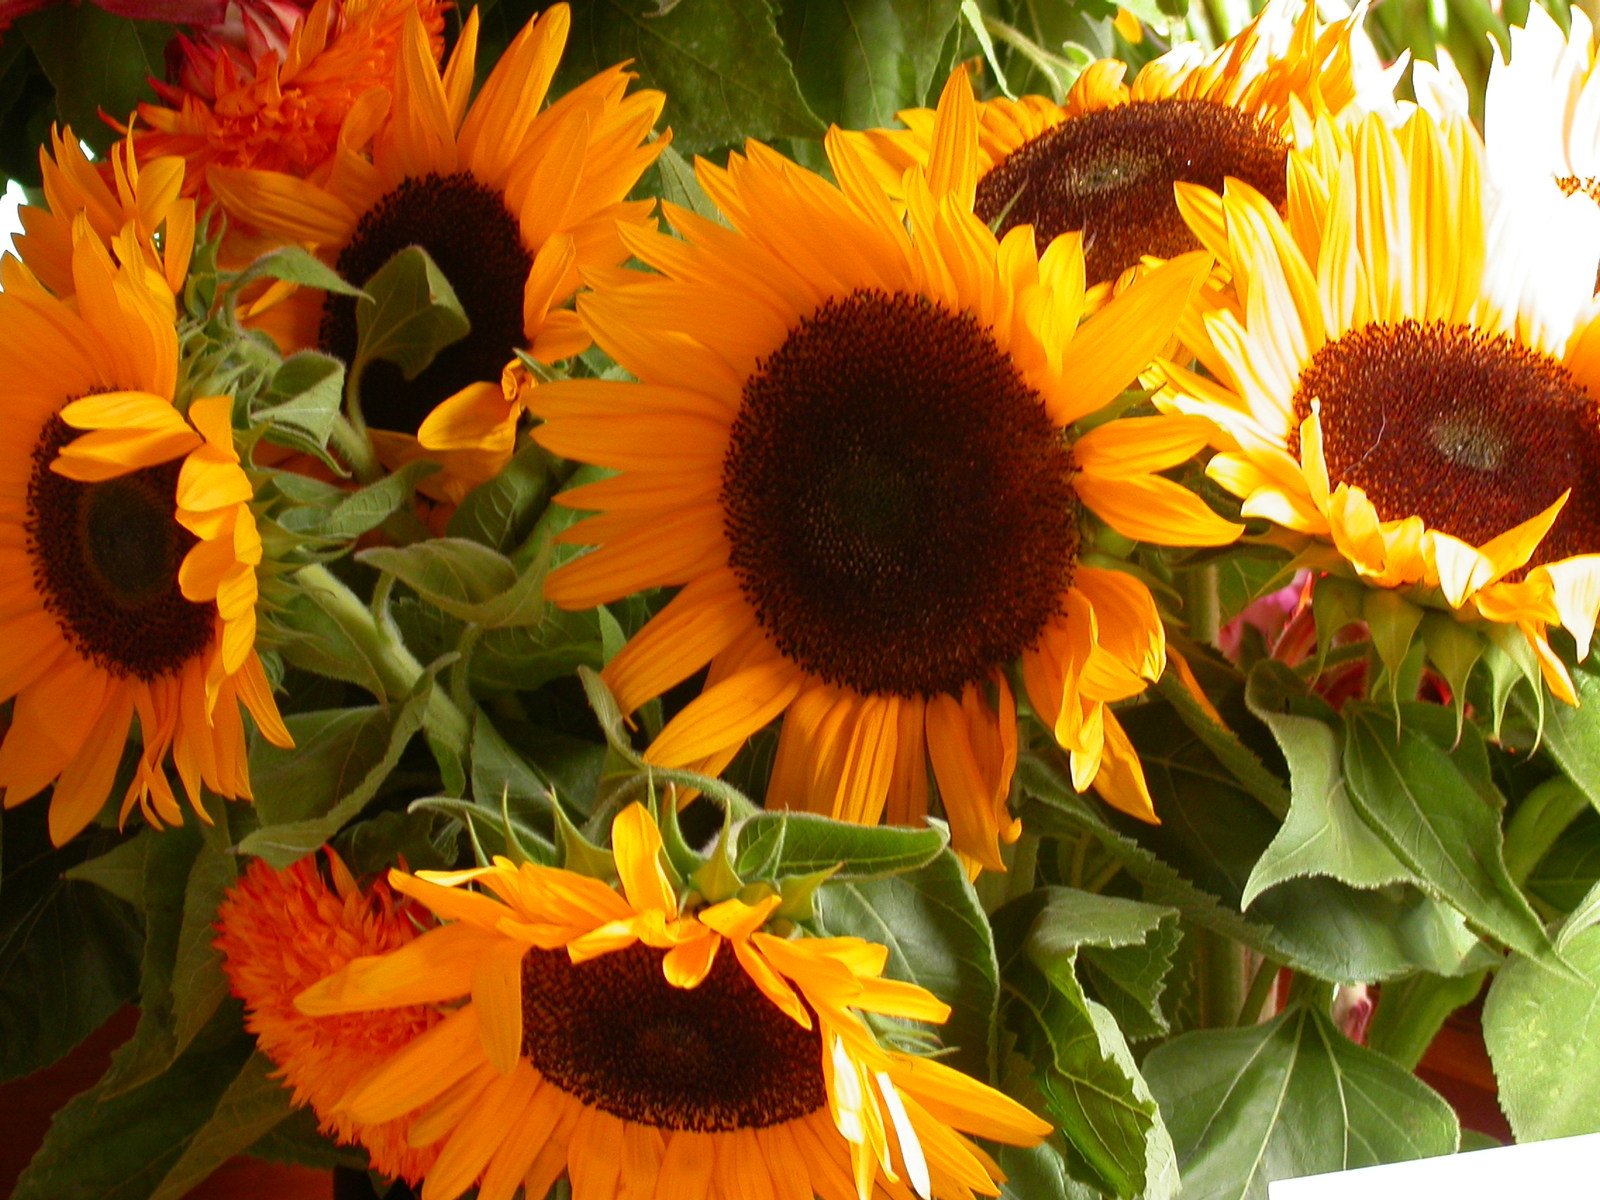 a bouquet of yellow and red sunflowers